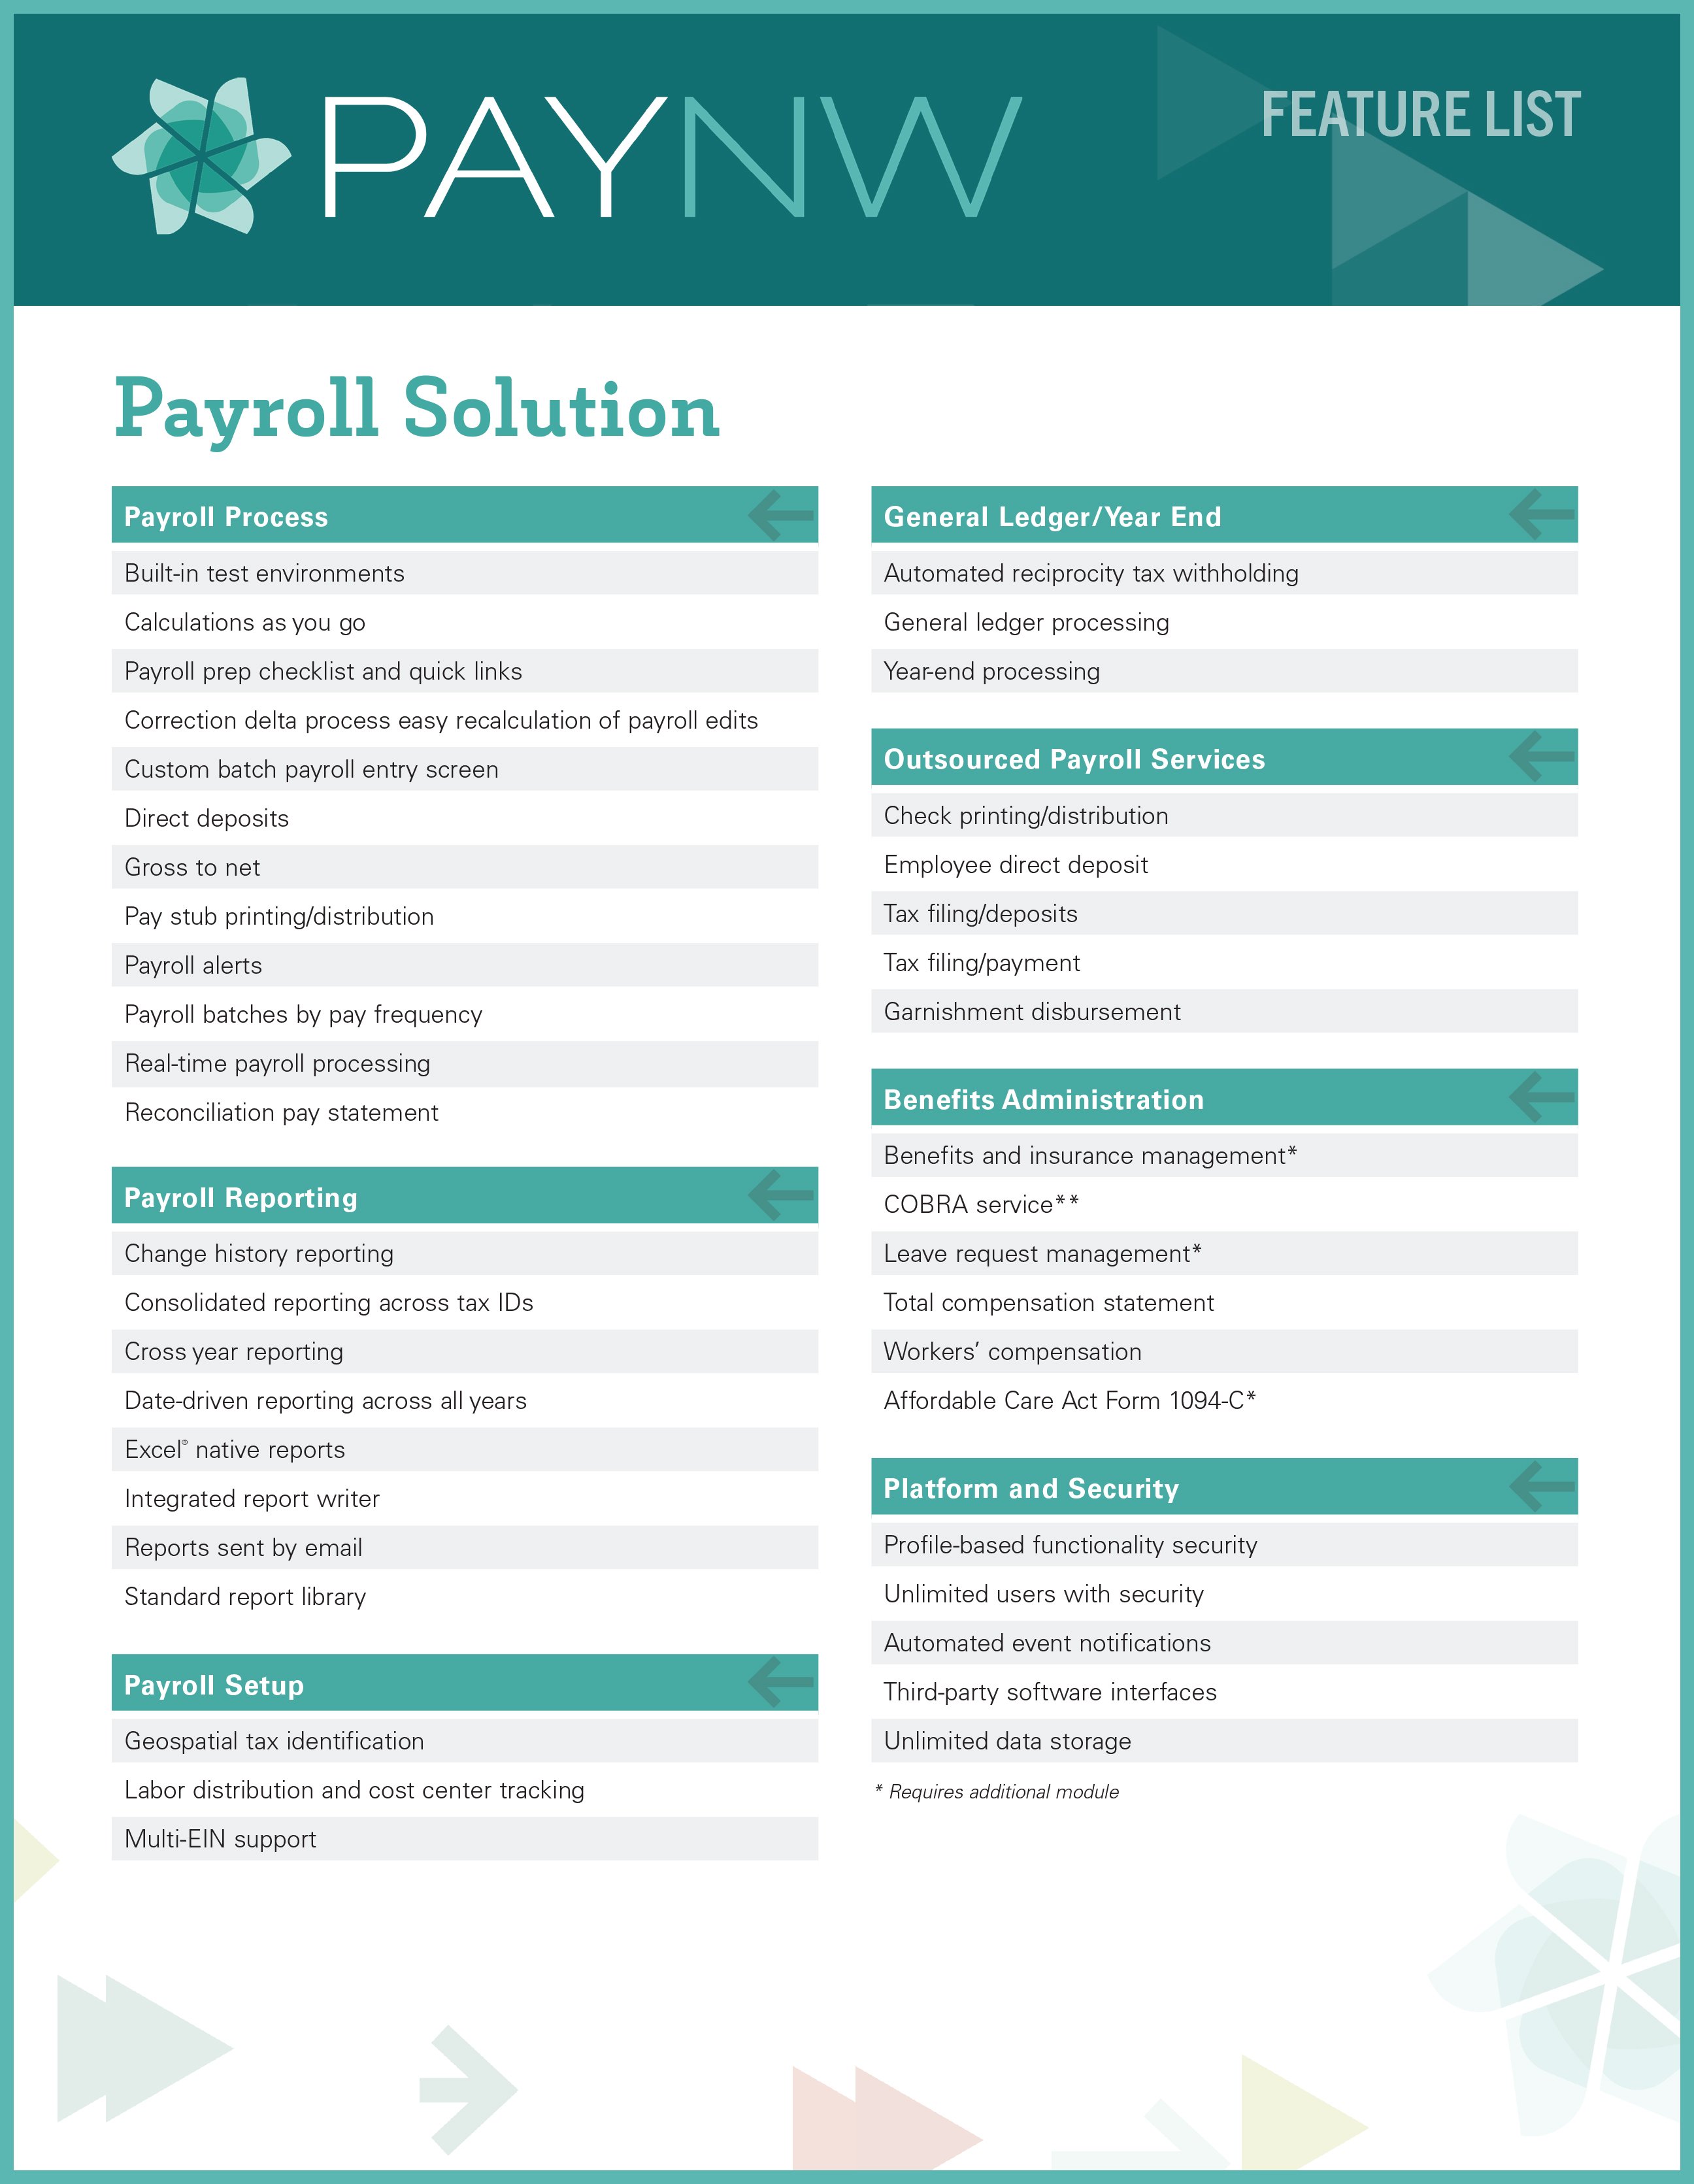 www.paynw.comhubfsCollateral Growth Funnel MaterialPayroll Feature ListPayNW - Payroll Feature List Cover-3